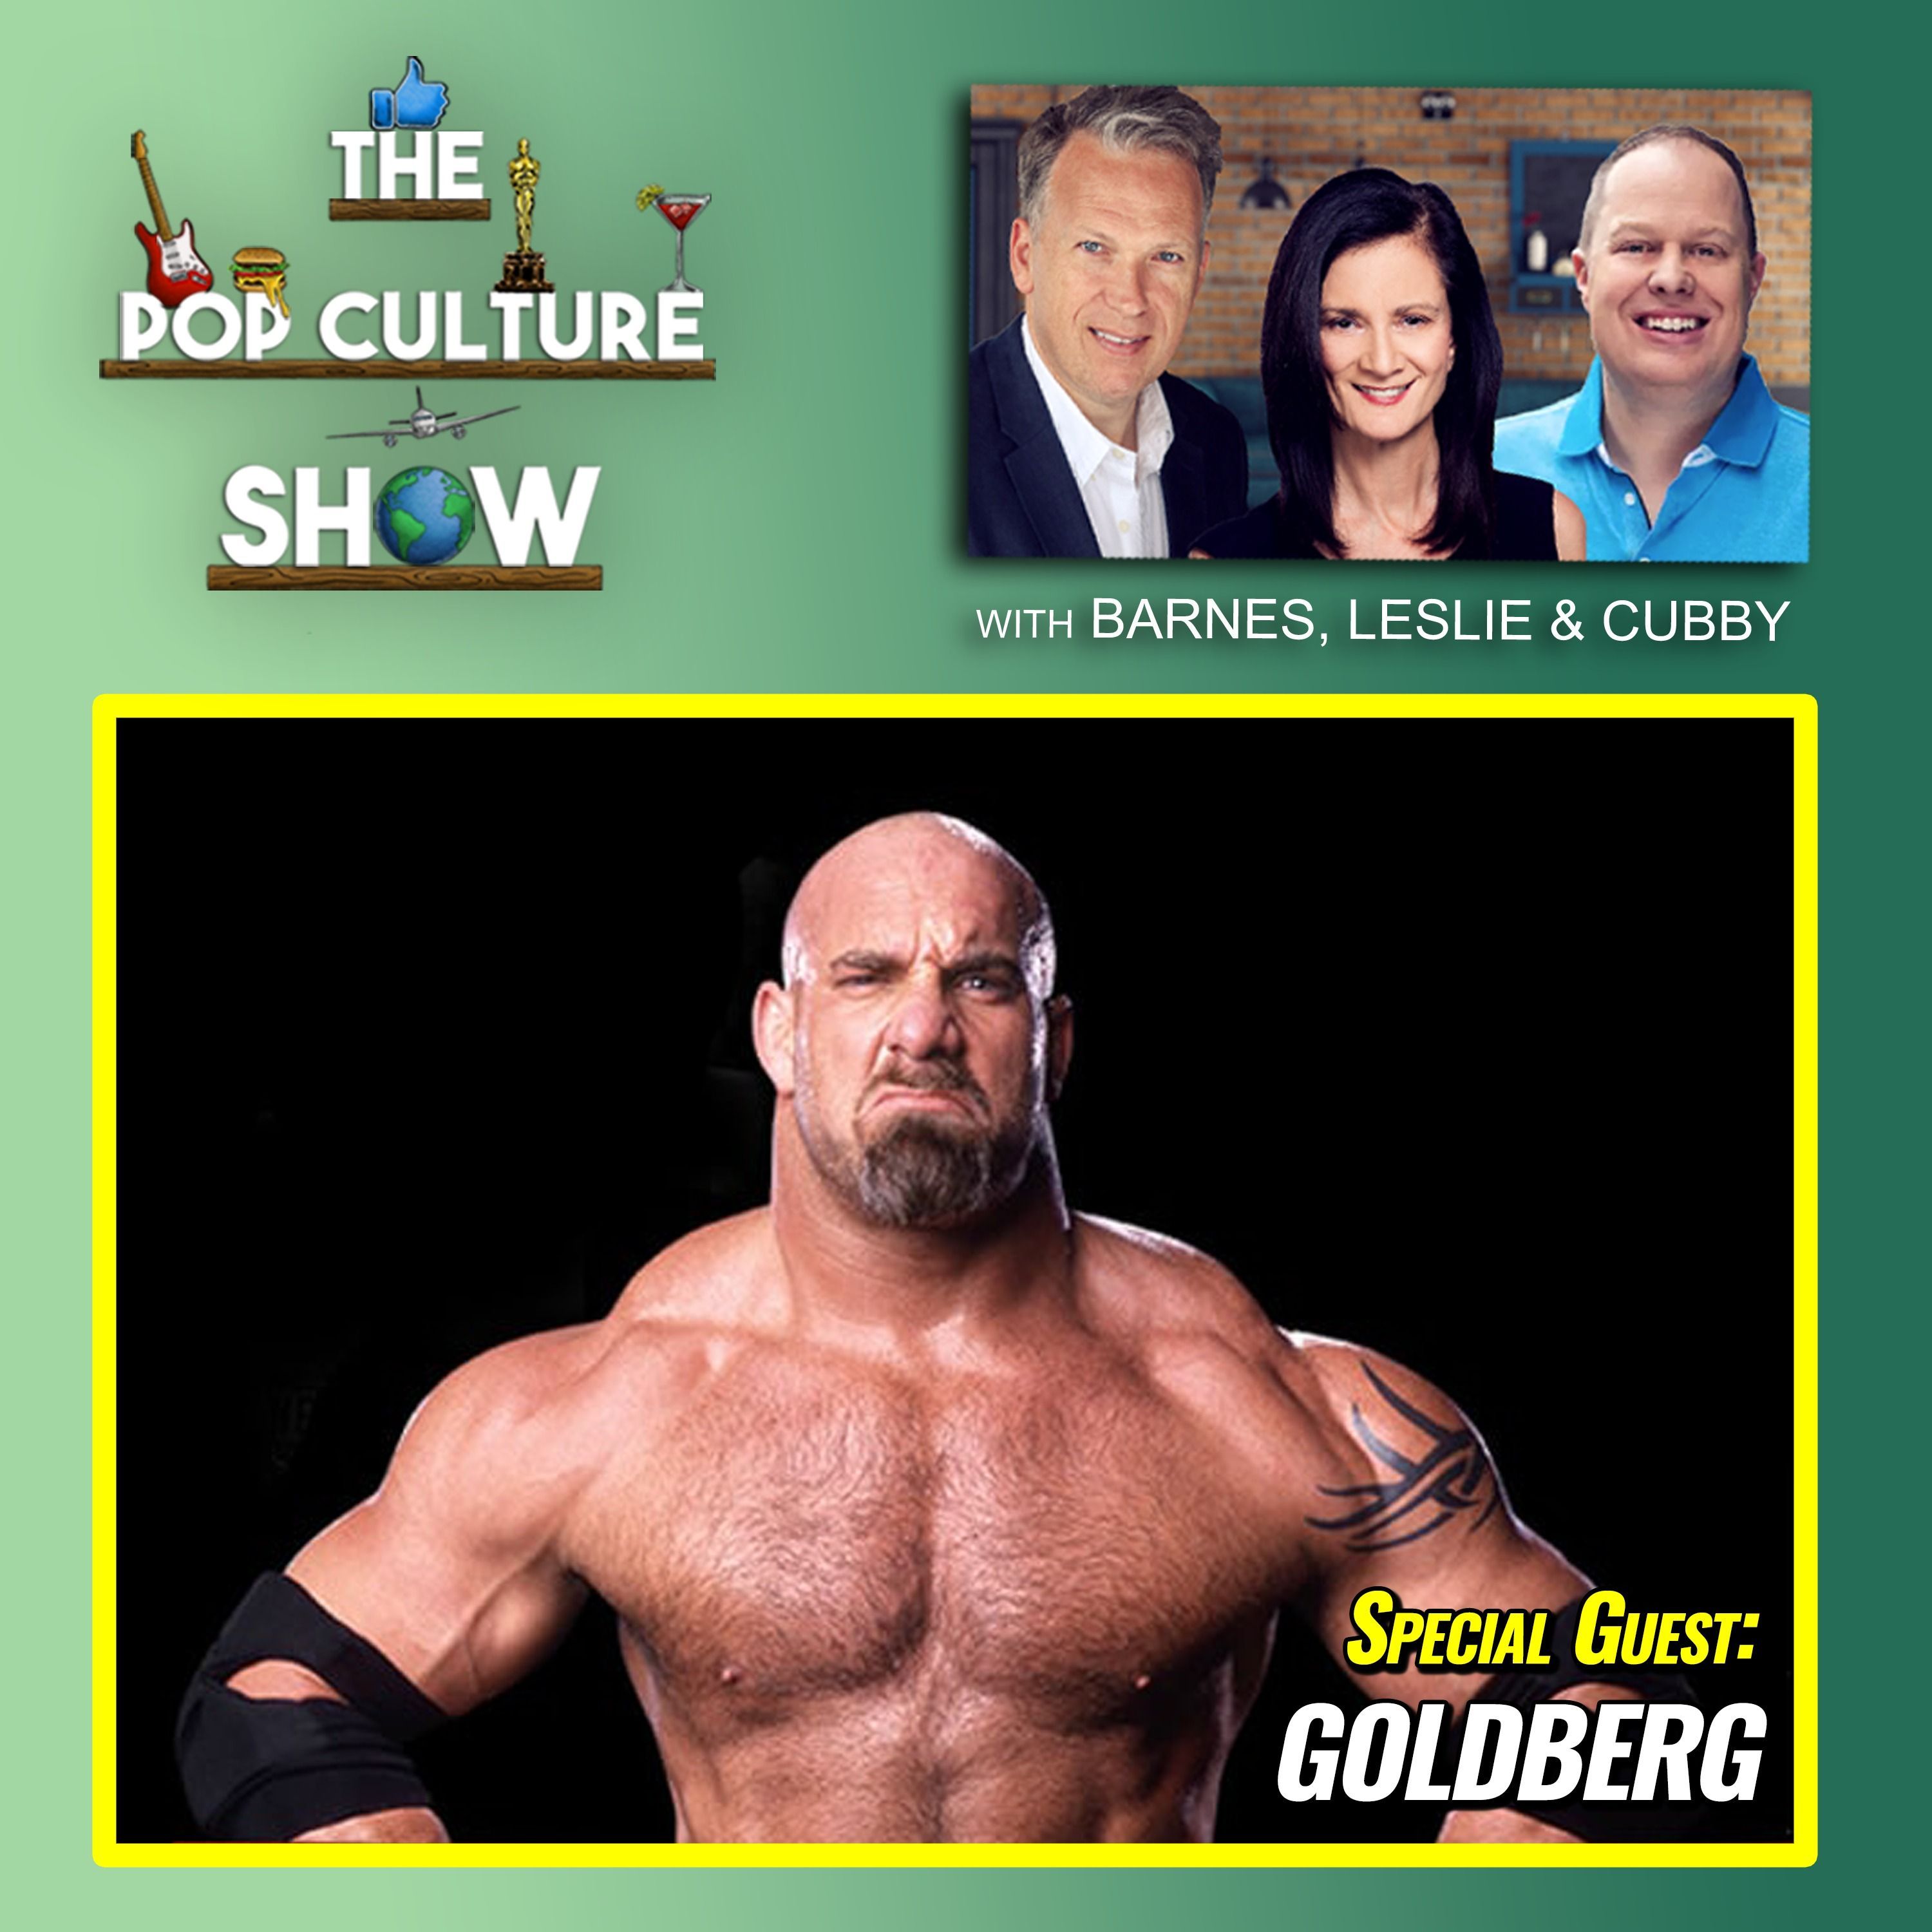 Goldberg Interview - iPhone 12 - Taylor Swift - Leslie Confronts a "Killer" Image